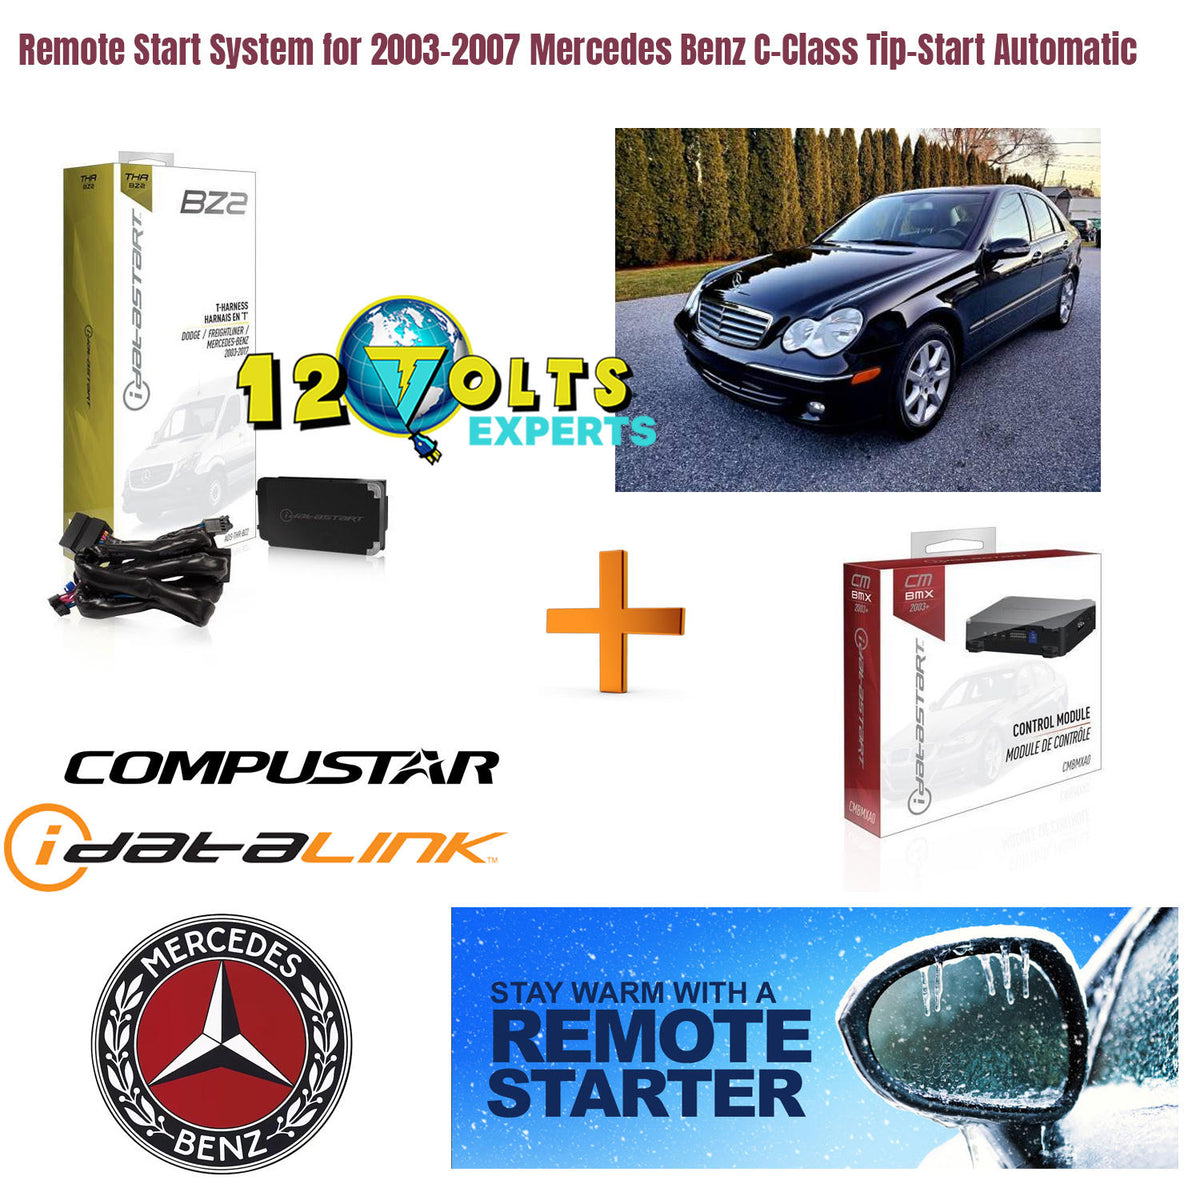 Remote Start System for 2003-2007 Mercedes Benz C-Class Tip-Start Automatic